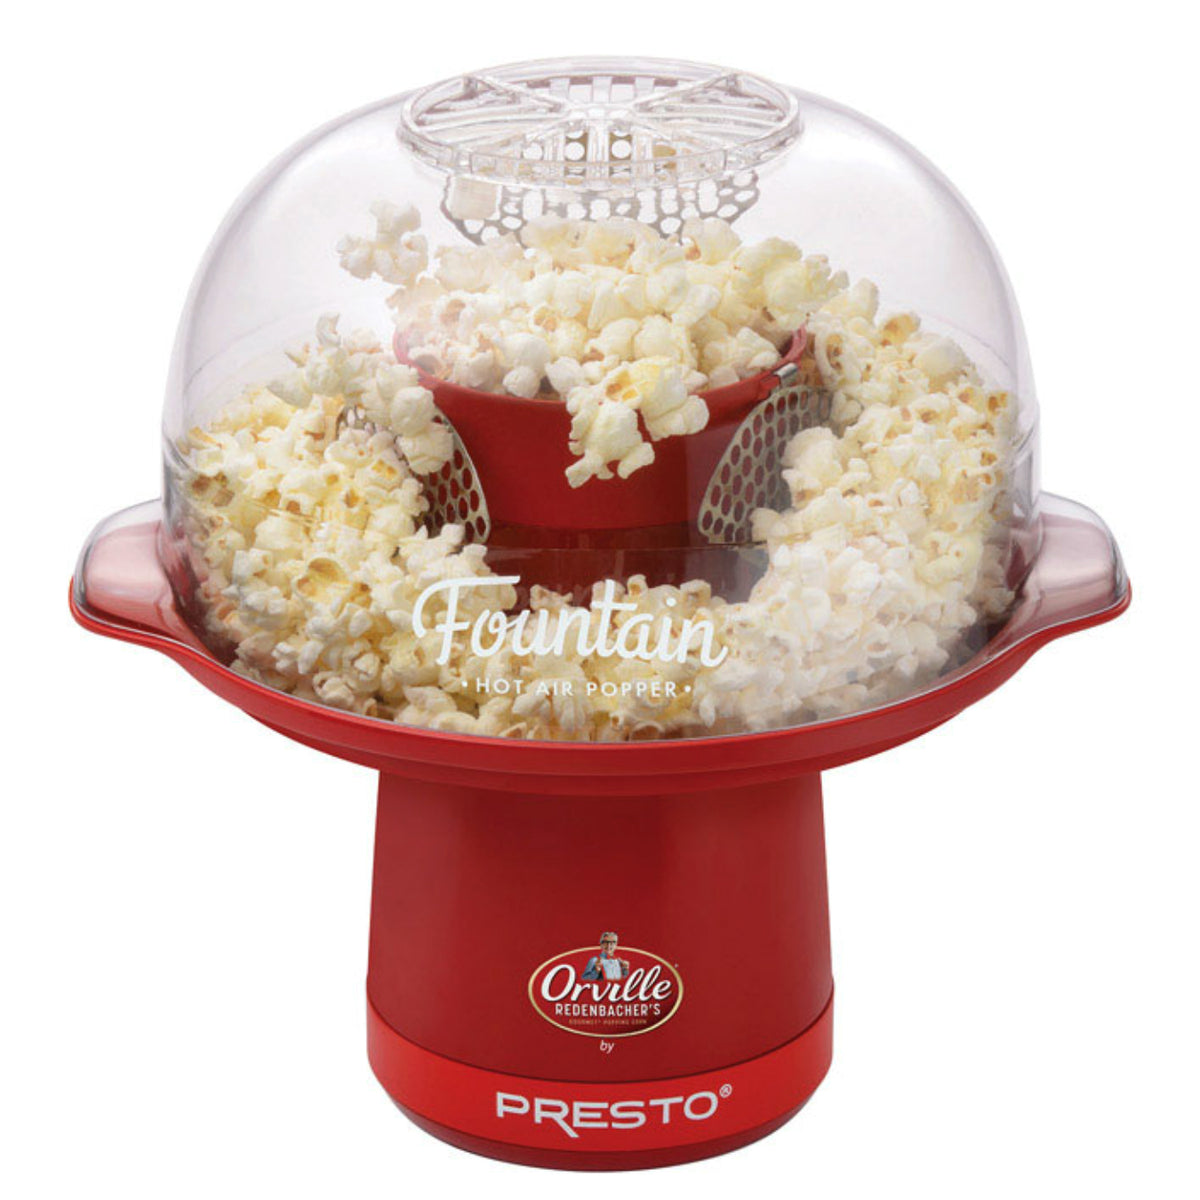 Buy fountain hot air popper - Online store for small appliances, popcorn poppers in USA, on sale, low price, discount deals, coupon code